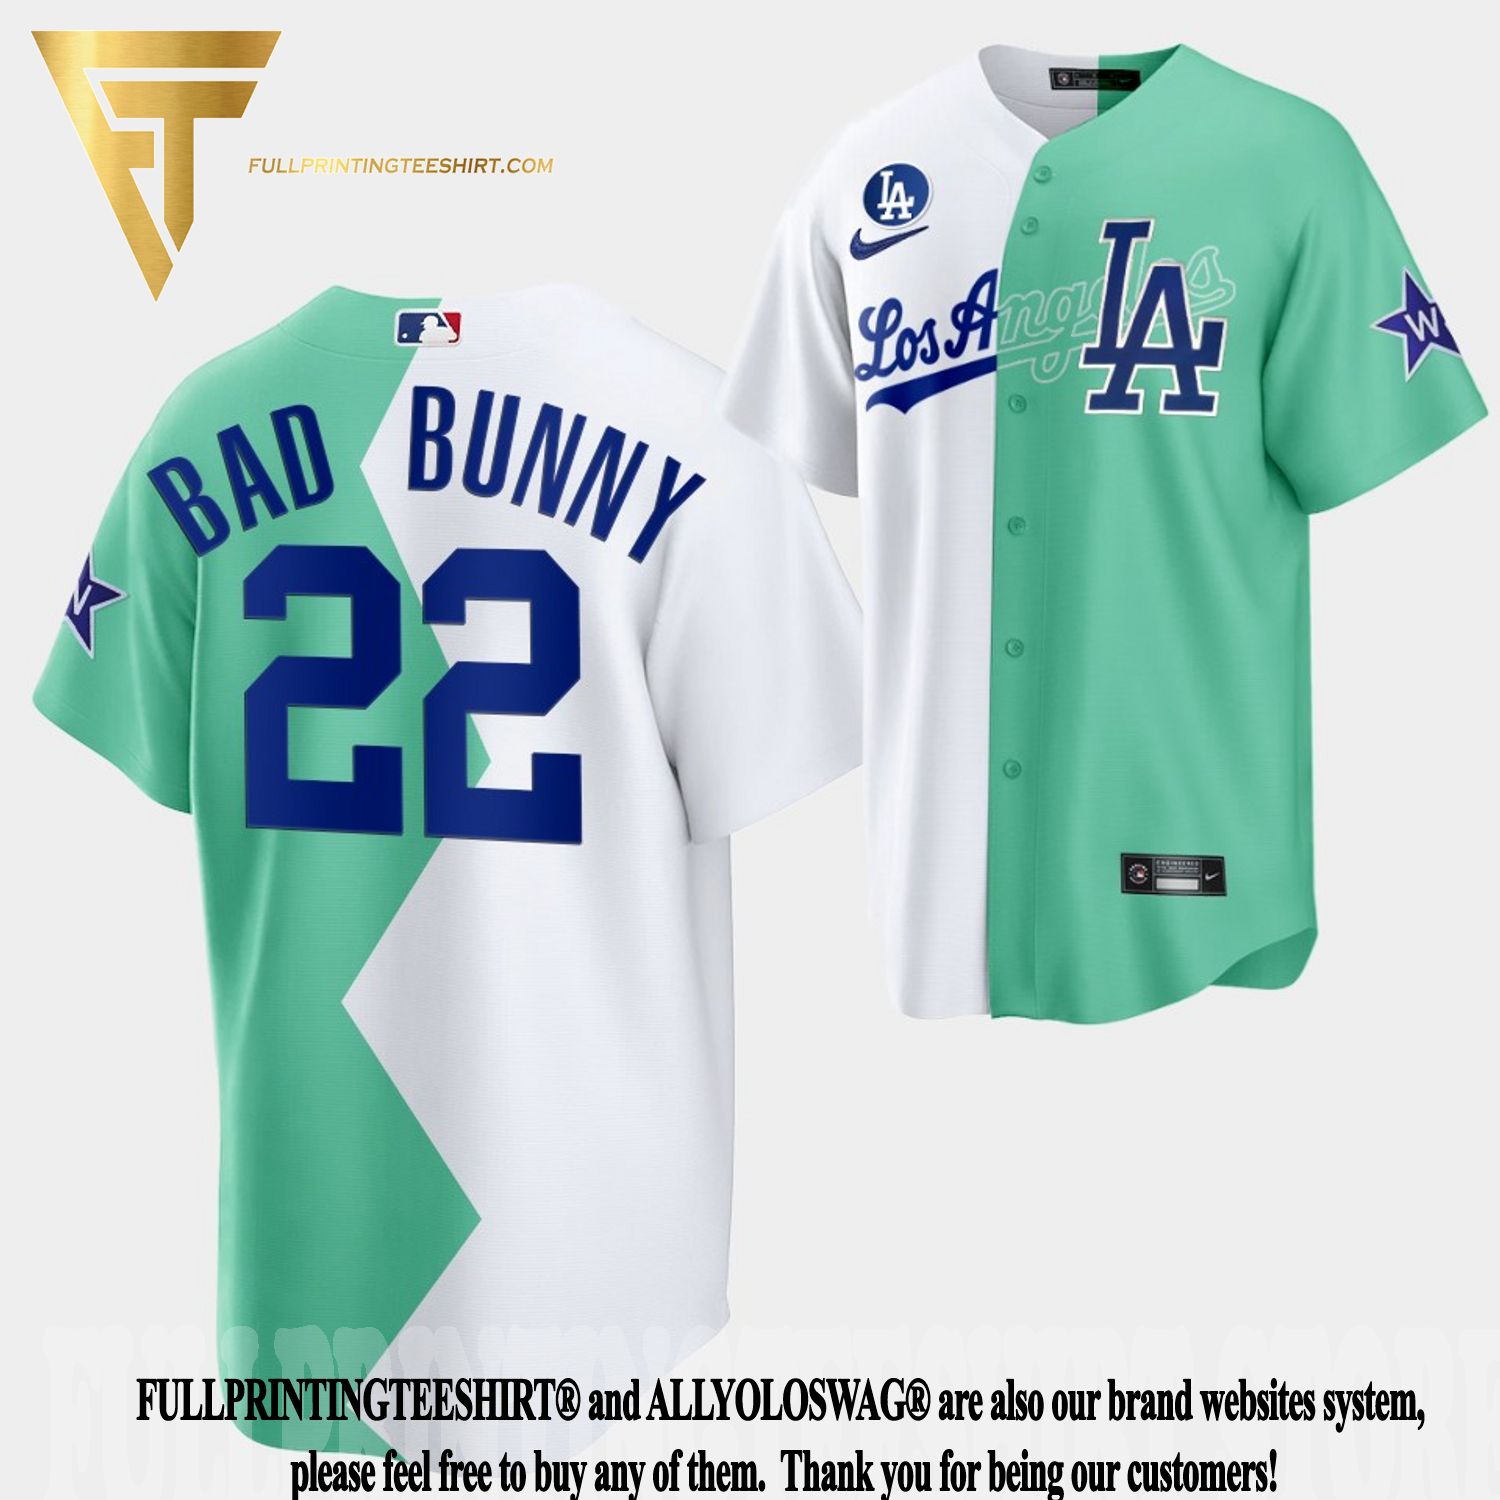 bad bunny all star game 2022